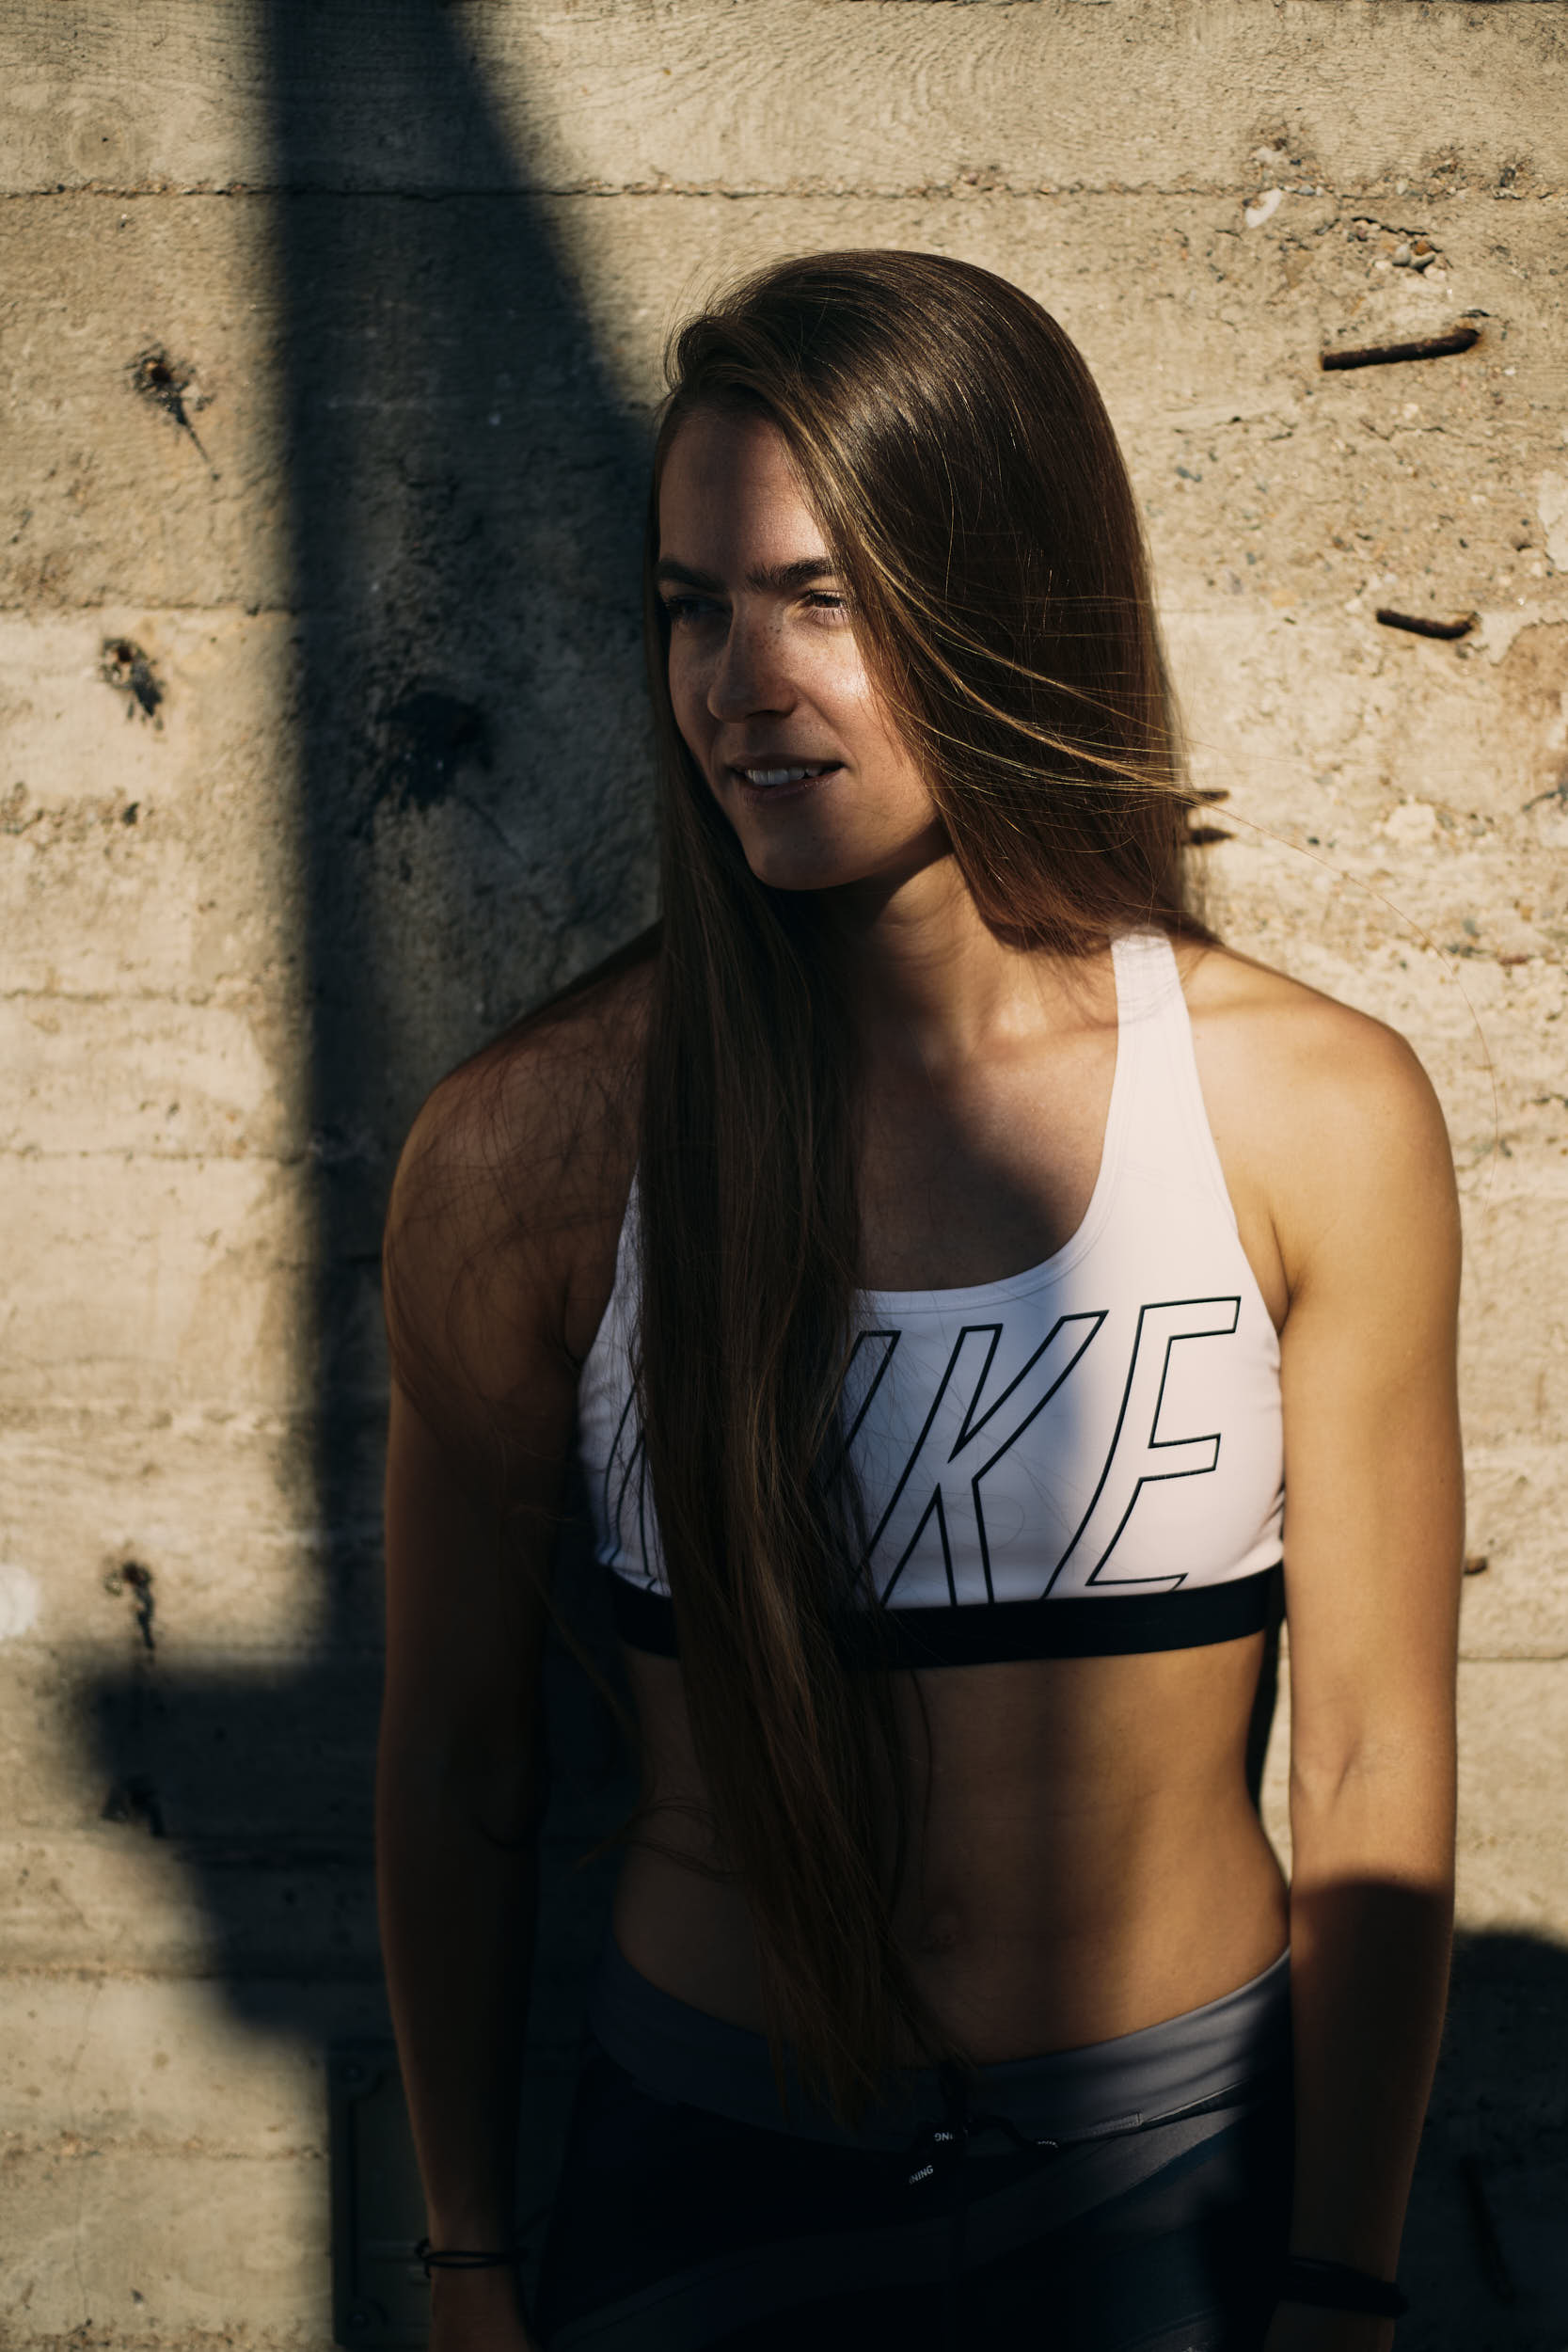 Active lifestyle photography: portrait of a girl posing in running apparel against a concrete wall.